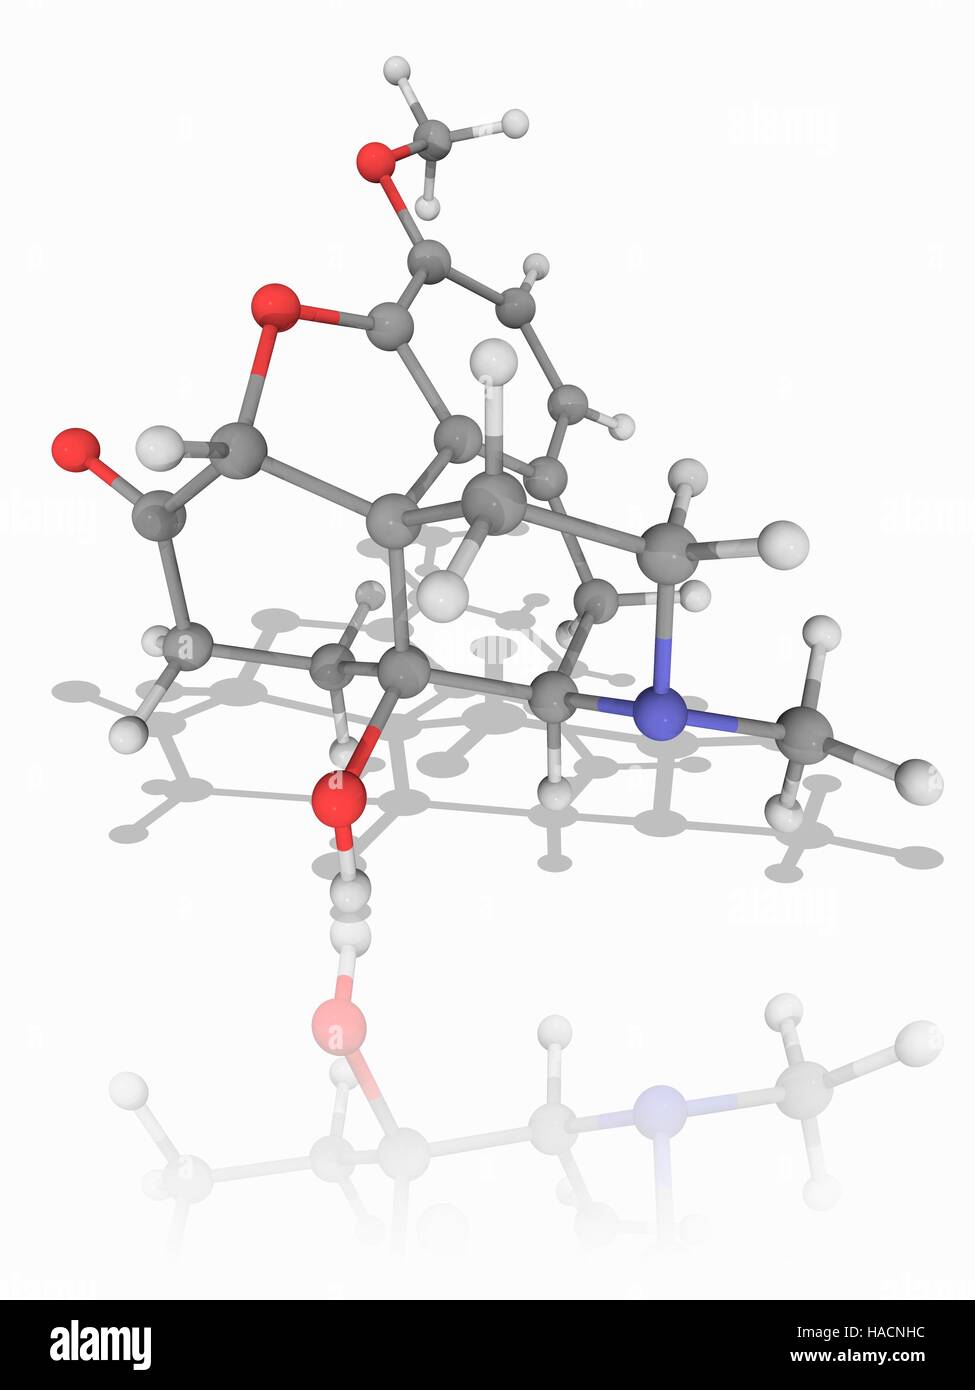 Oxycodone. Molecular model of the opioid analgesic drug oxycodone (C18.H21.N.O4), used to treat moderate to severe pain. Atoms are represented as spheres and are colour-coded: carbon (grey), hydrogen (white), nitrogen (blue) and oxygen (red). Illustration. Stock Photo